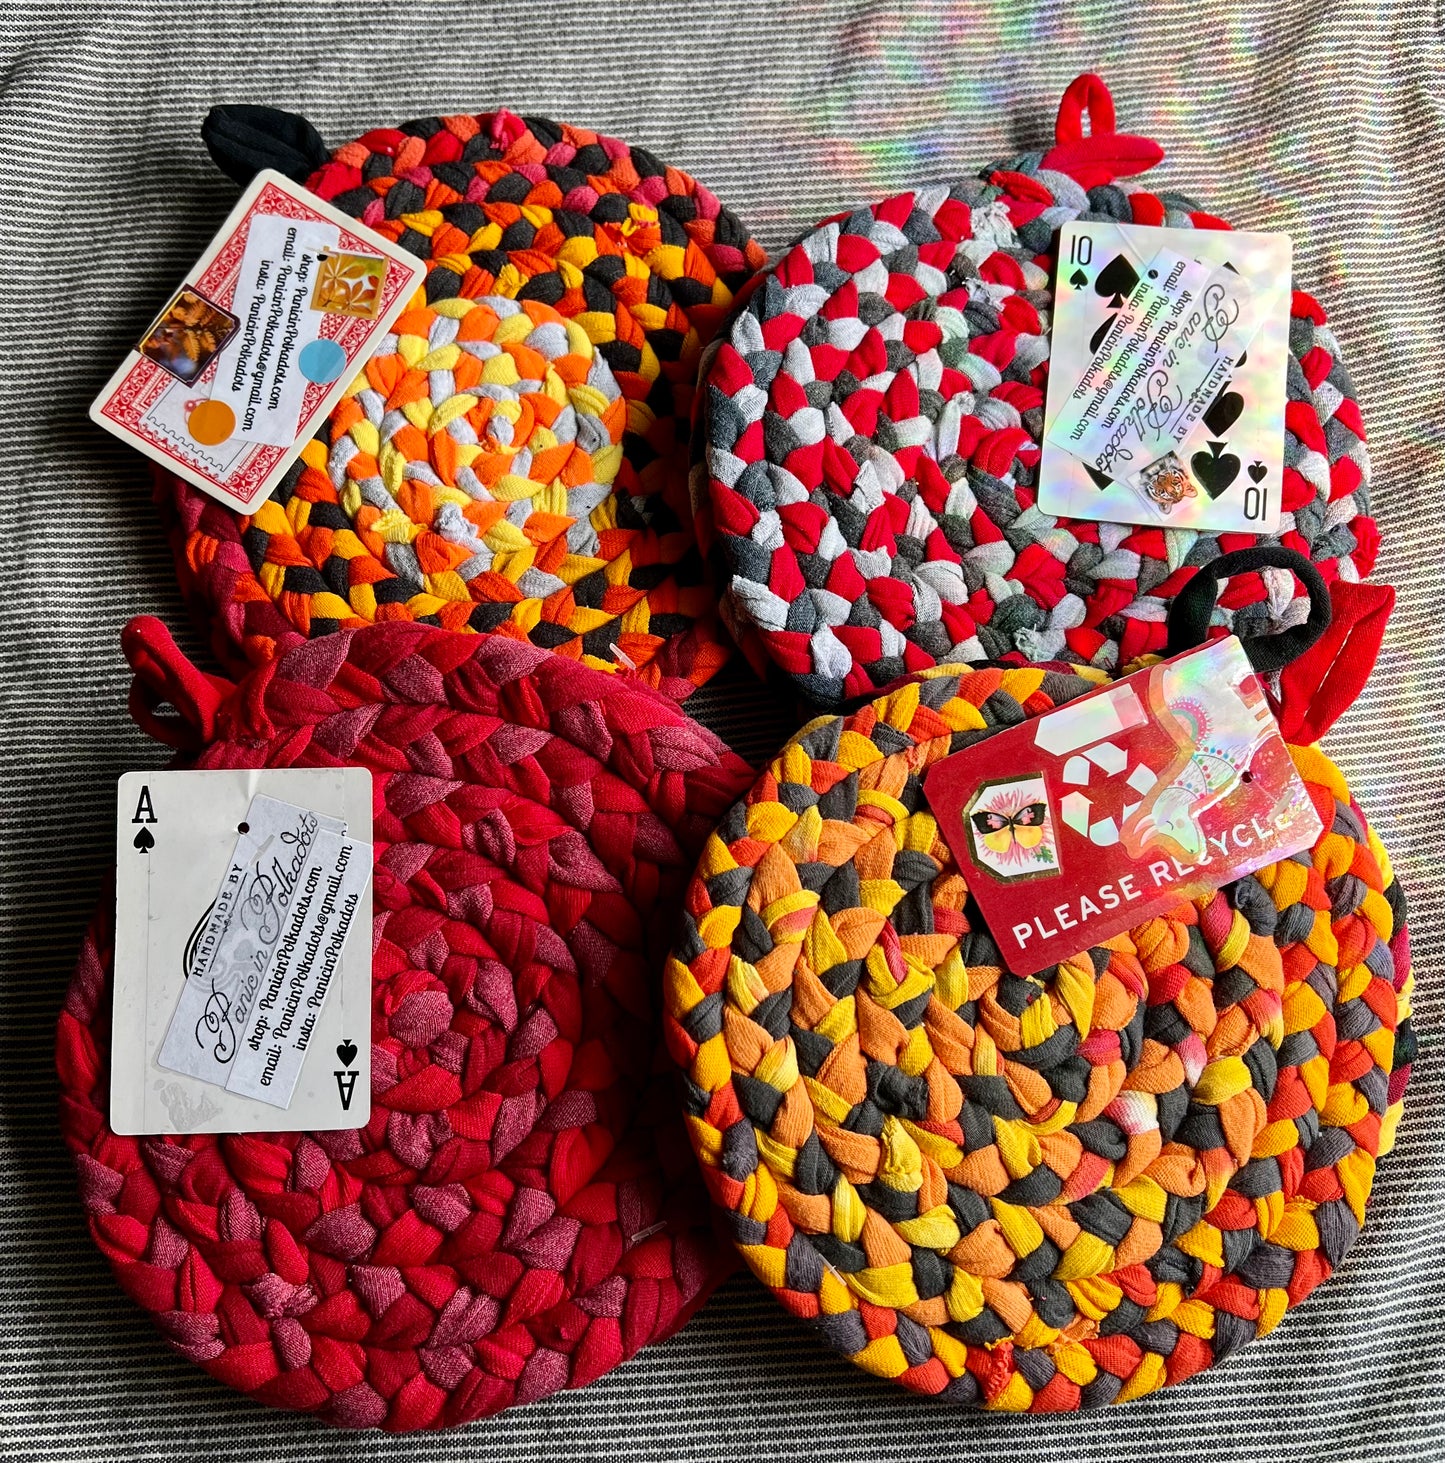 Four sets of trivet potholders, all laid together in a pile. Each set has a playing card with info about Panic in Polkadots.